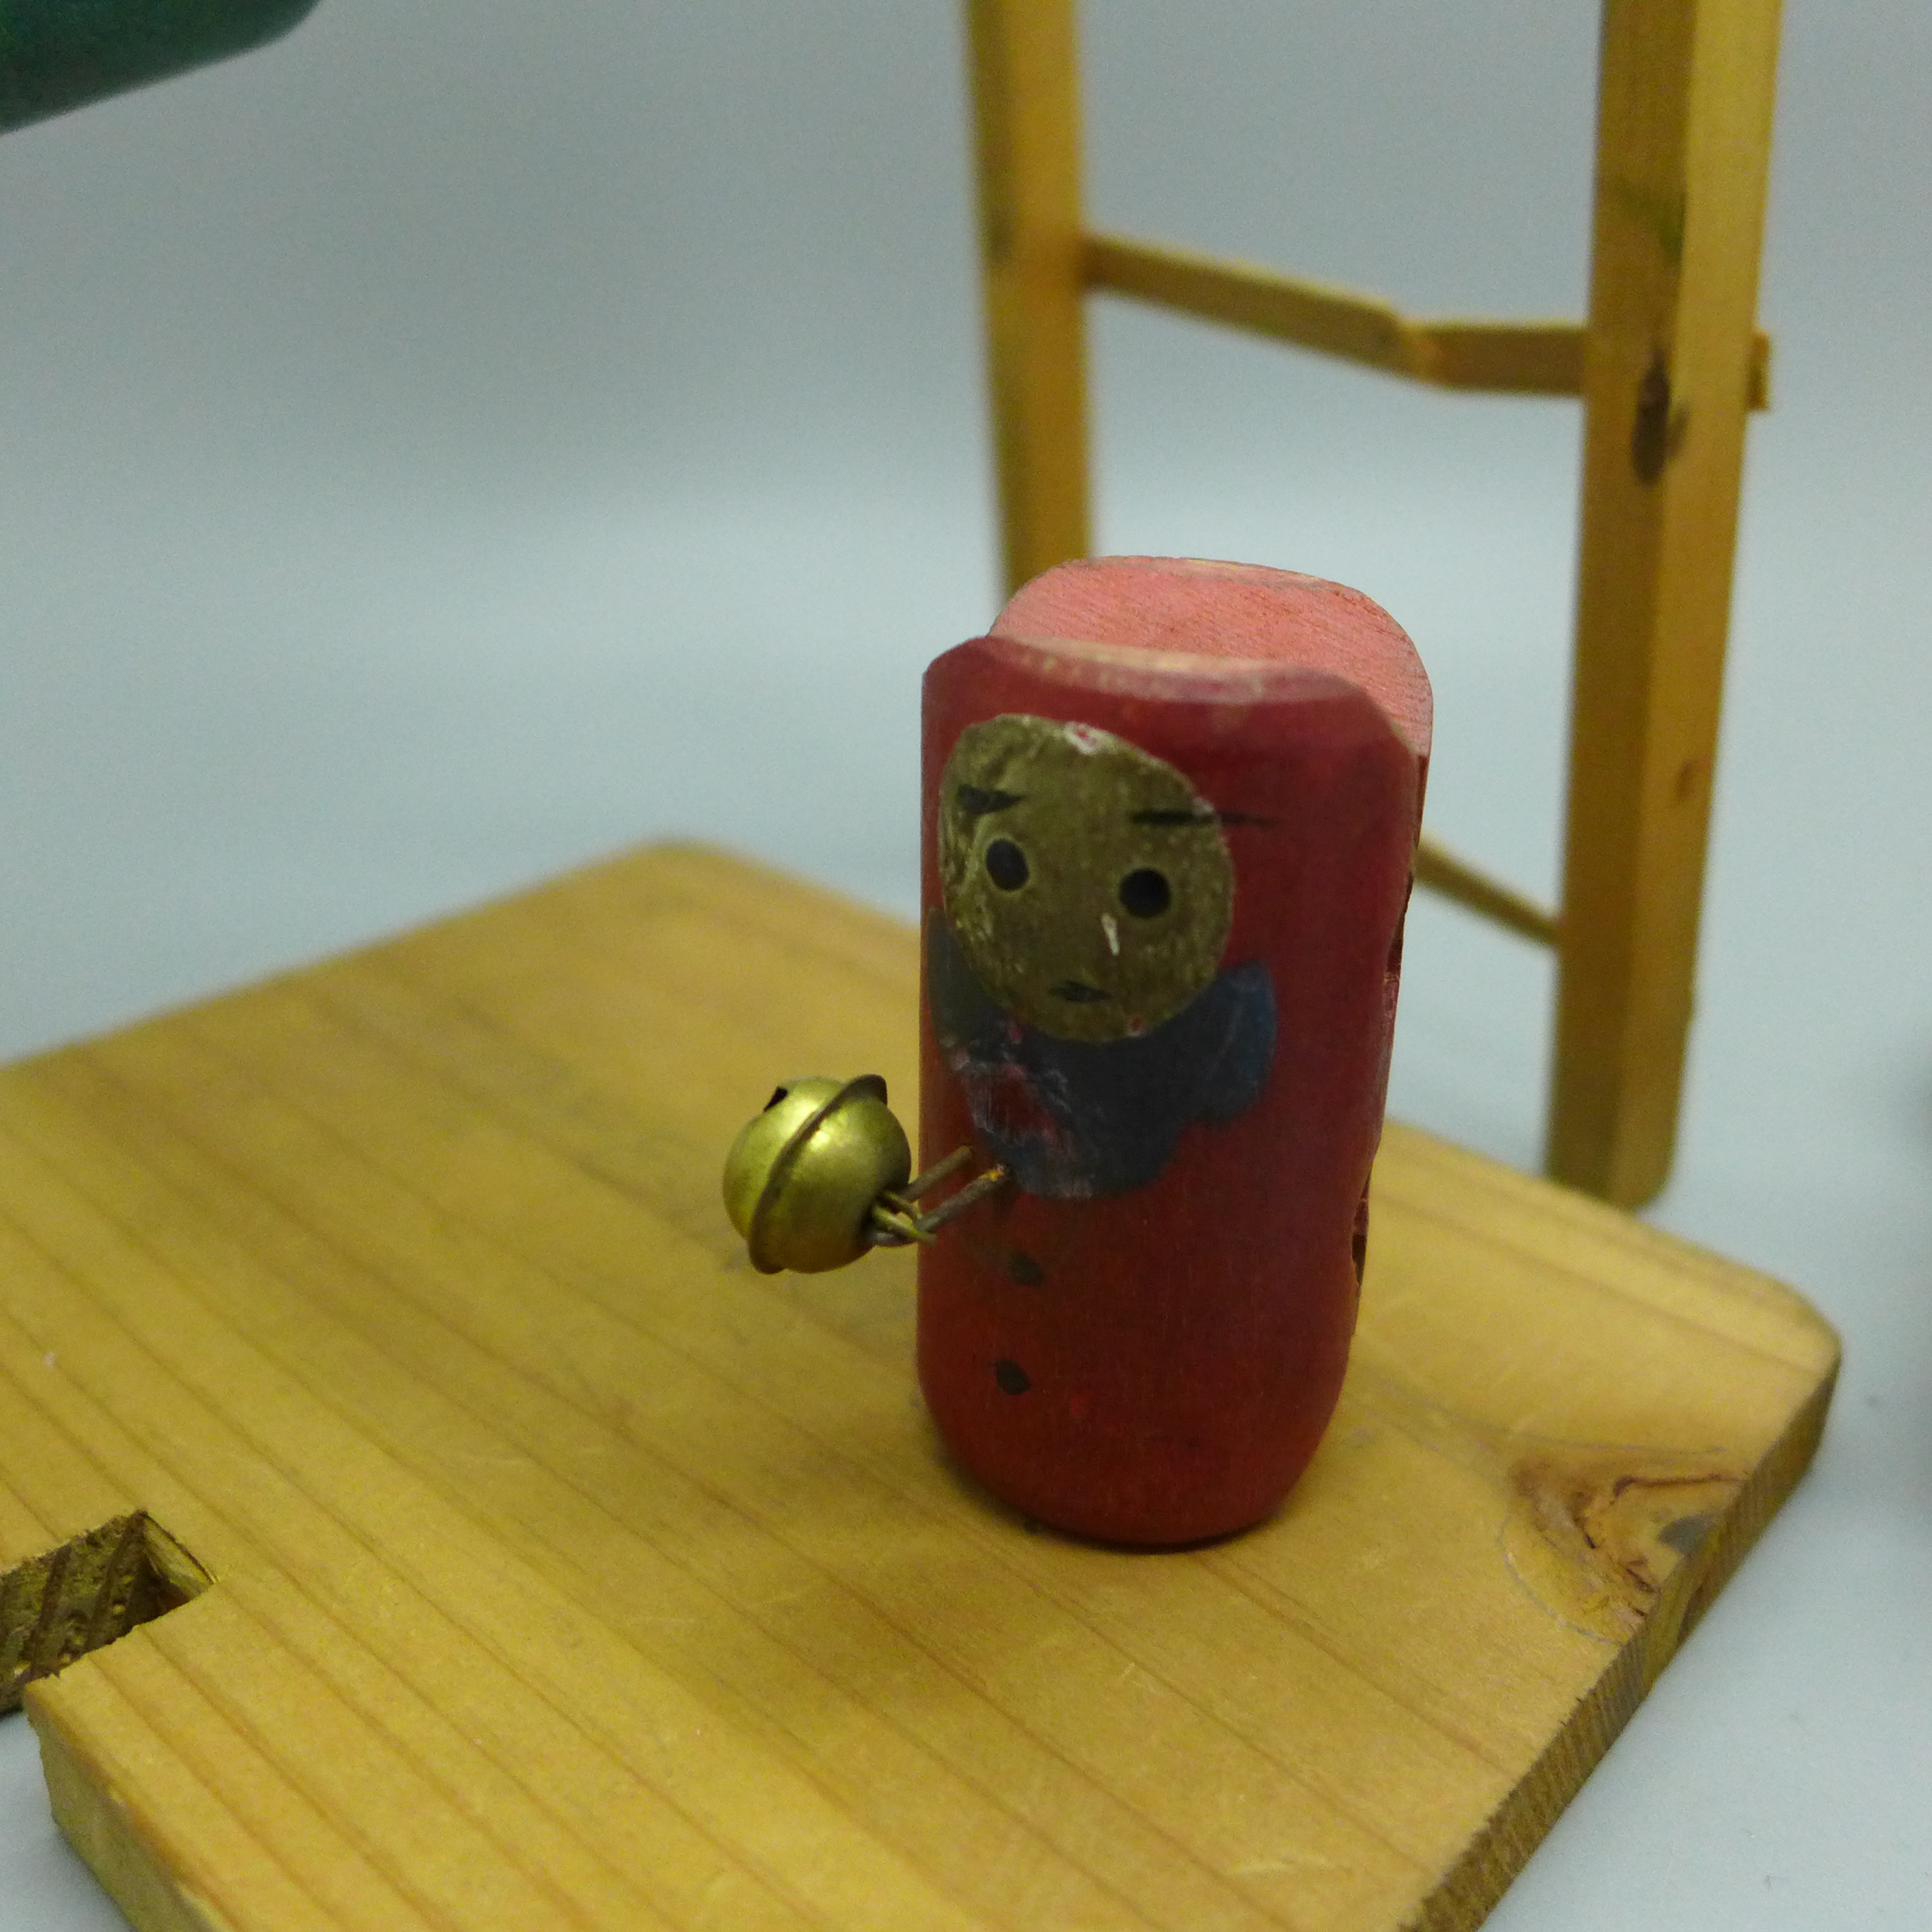 A clockwork Russian doll (no key) and a vintage wooden toy - Image 5 of 5